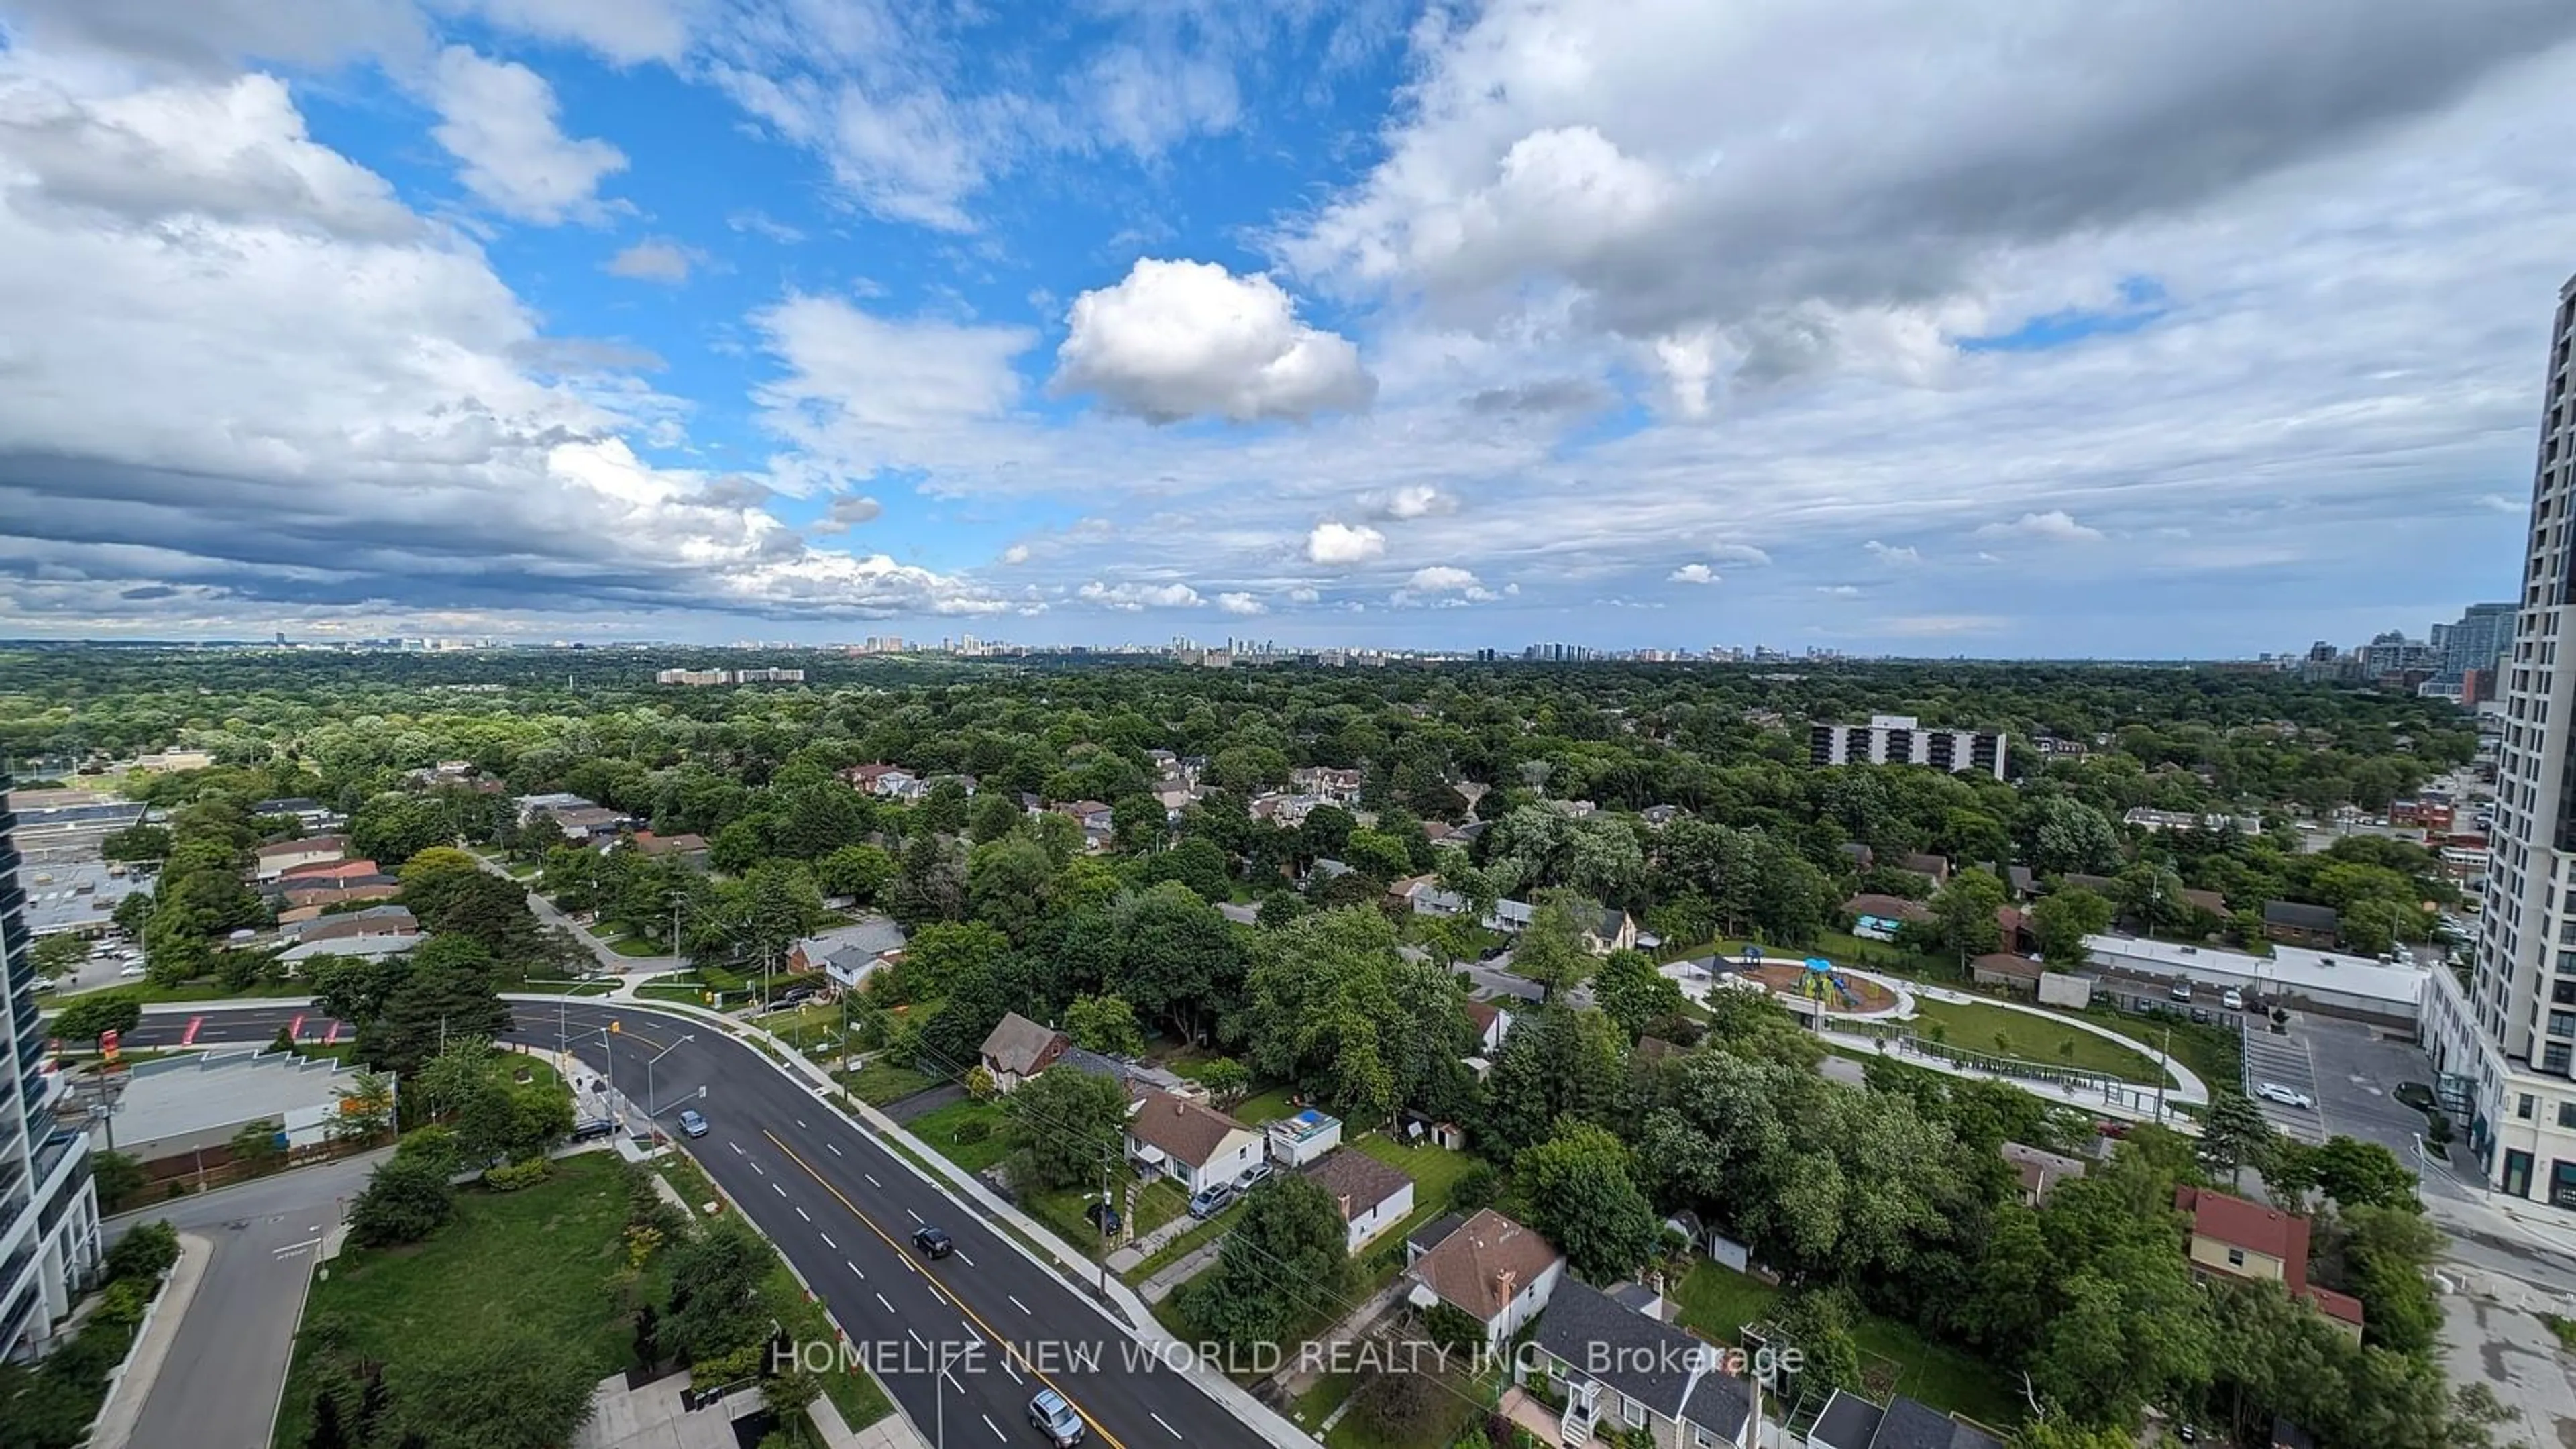 Lakeview for 7161 Yonge St #1729, Markham Ontario L3T 0C8